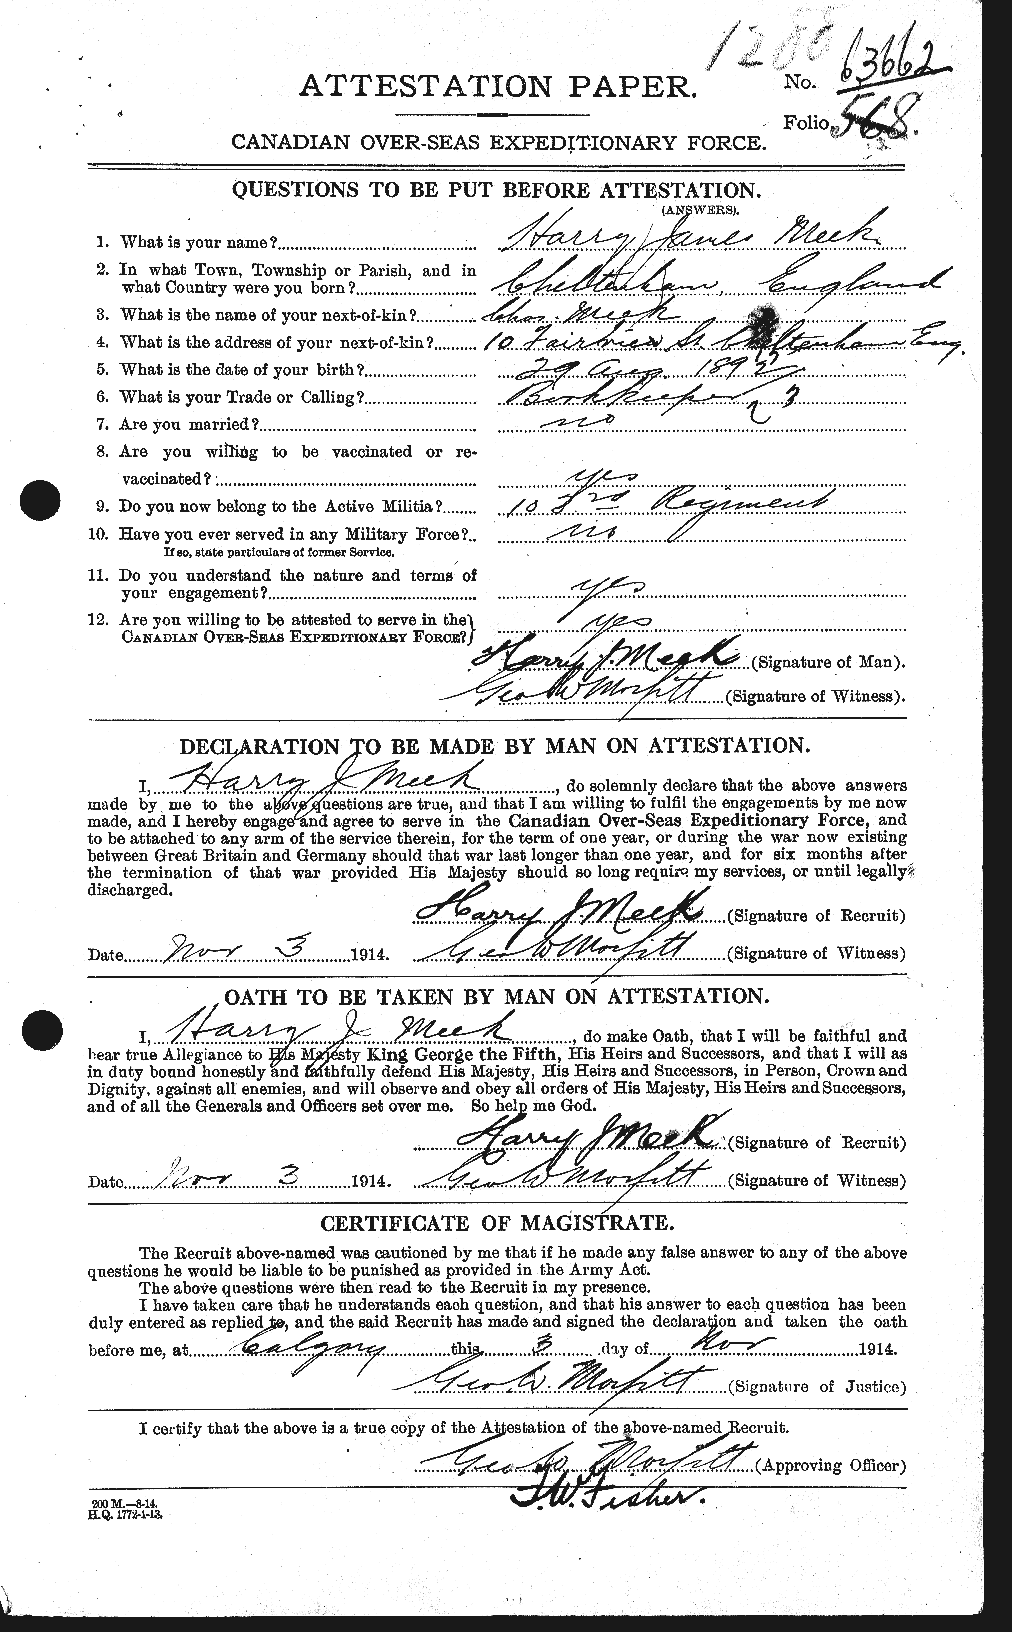 Personnel Records of the First World War - CEF 487676a